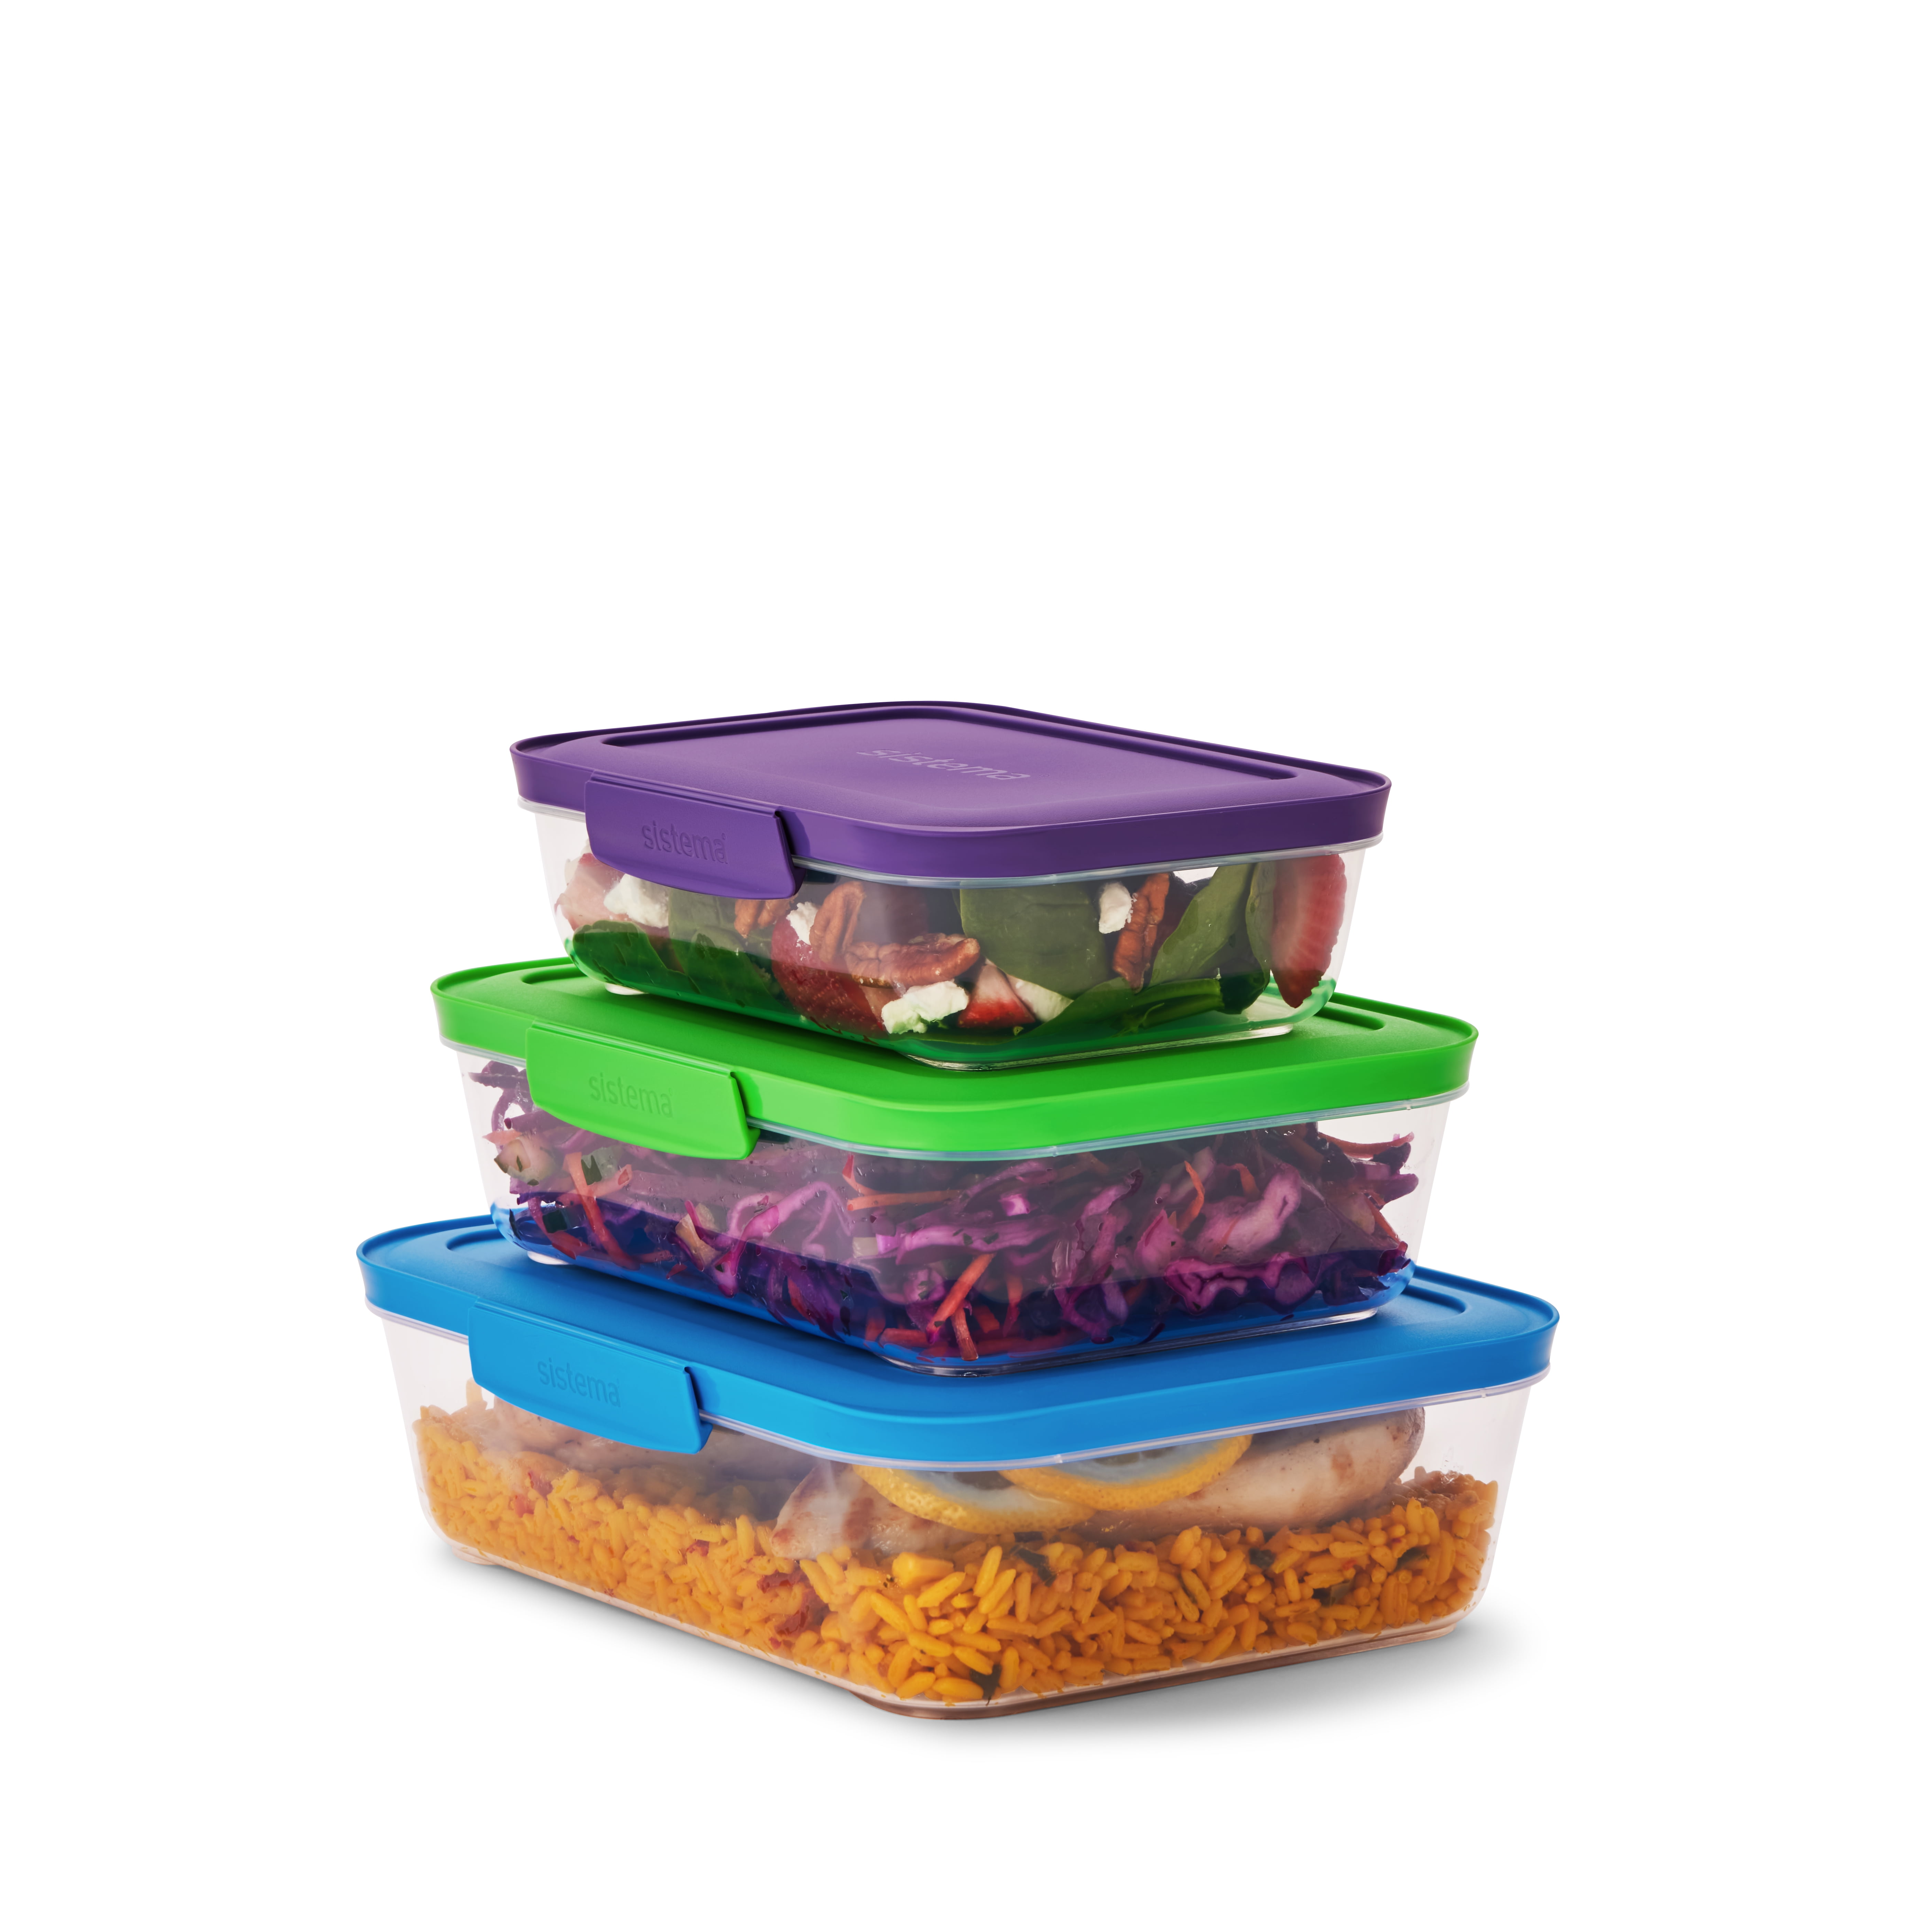 EUC Tupperware Nesting Storage Containers Set of 3 Rectangular Lids included